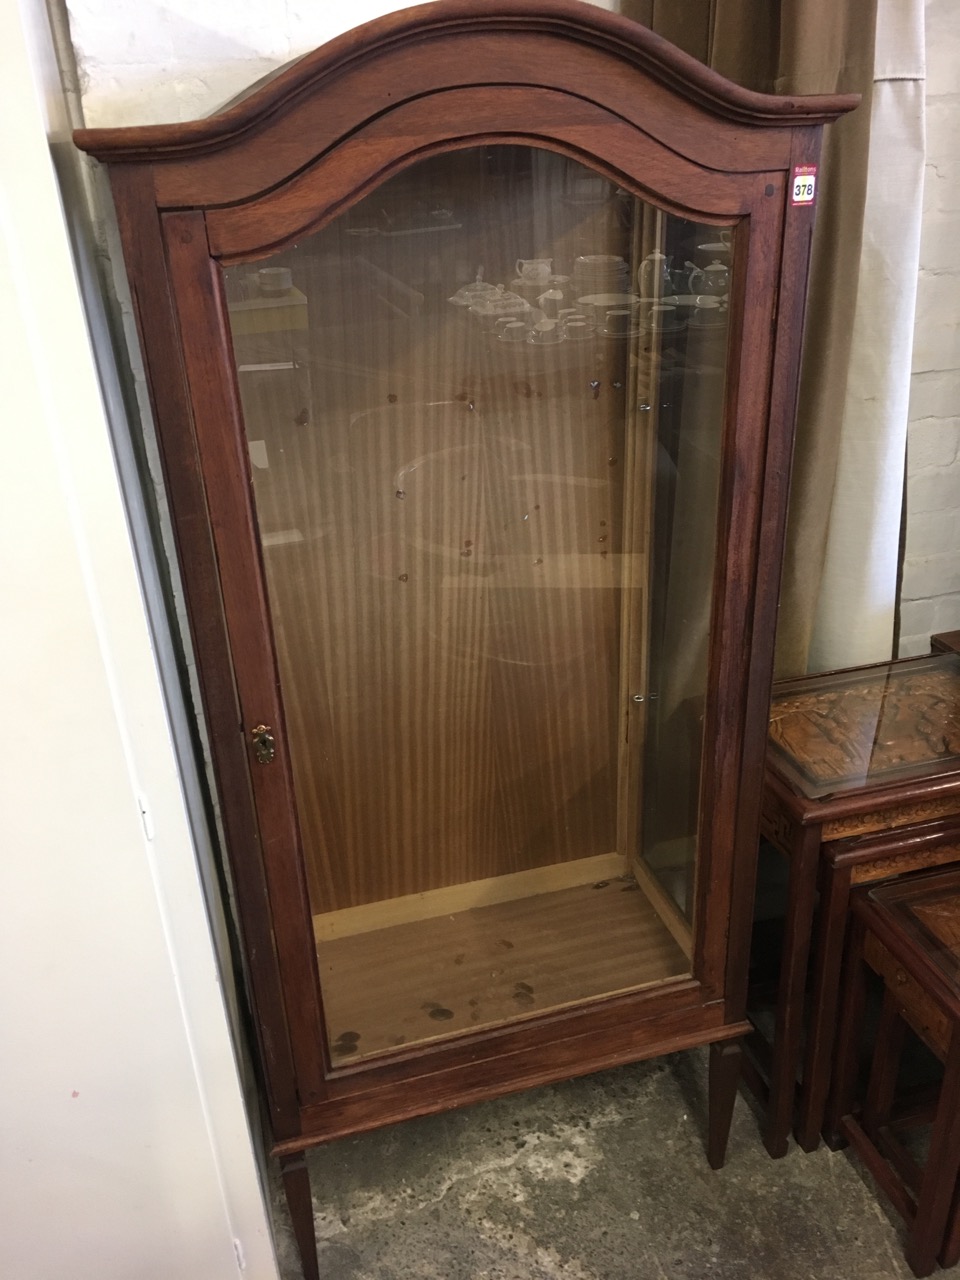 A glazed vitrine with arched moulded cornice above a glass dowel jointed cupboard door, with glass